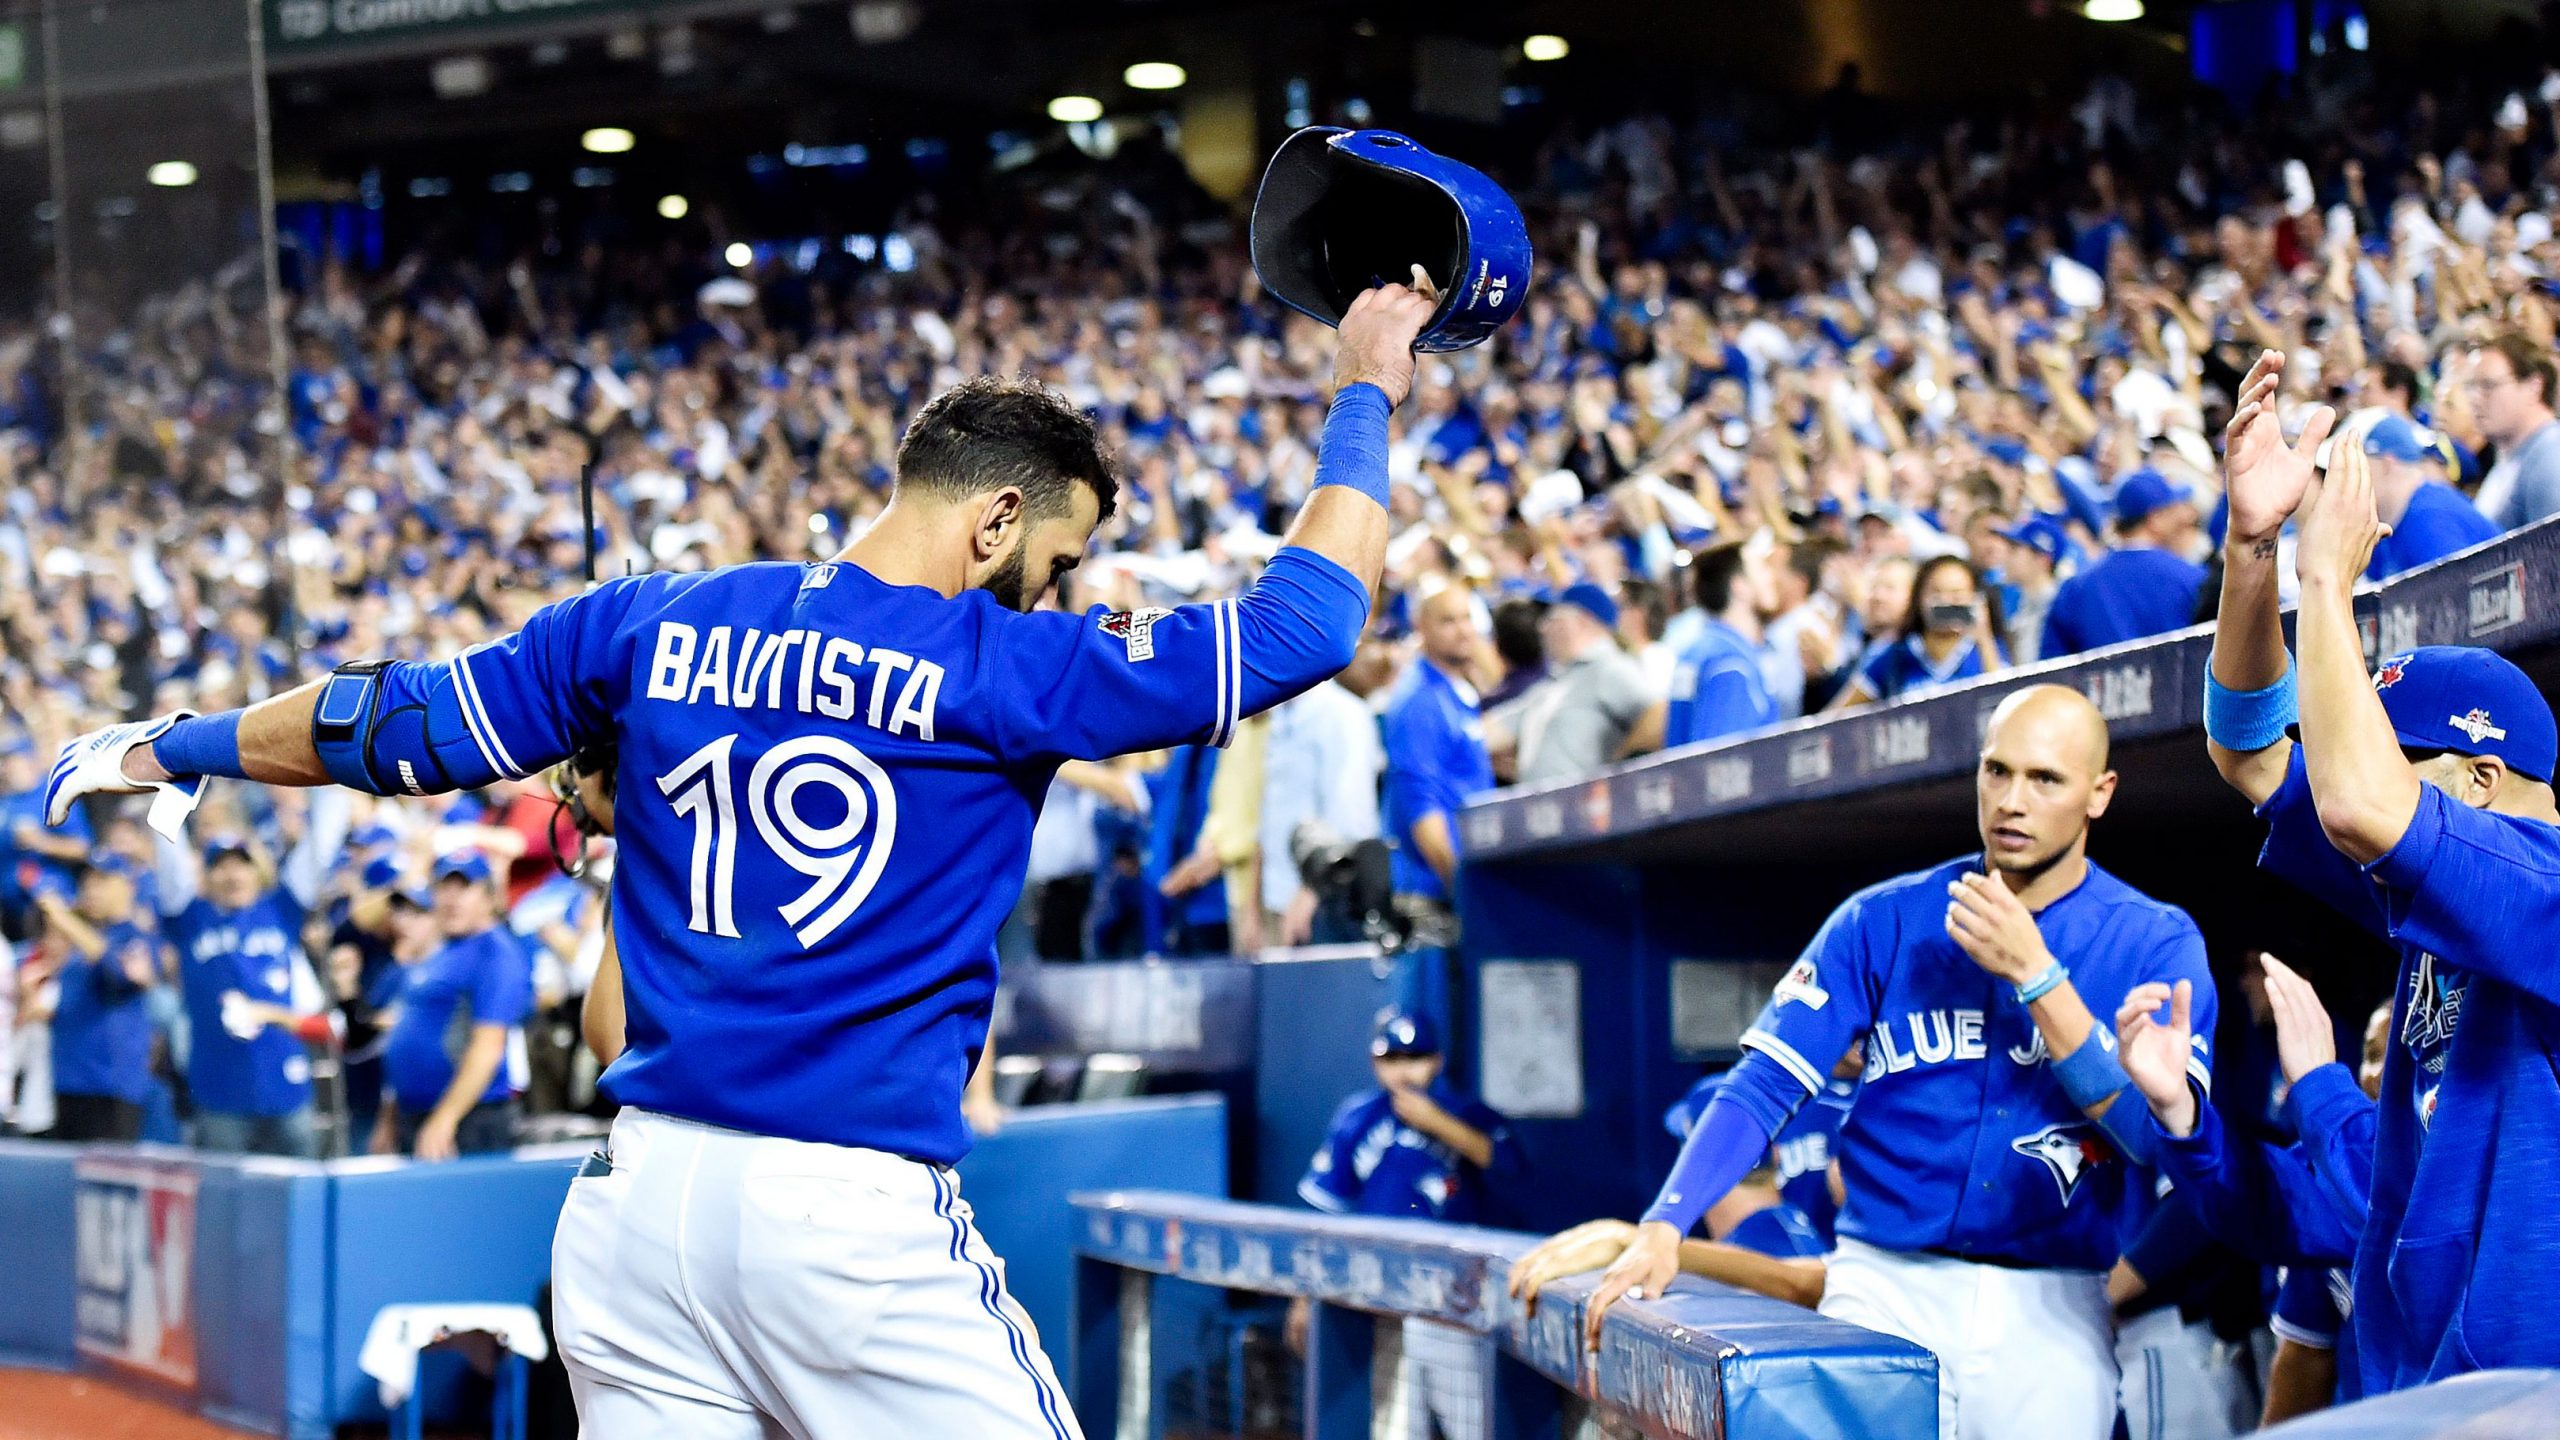 Anthopoulos: An angry Jose Bautista is a force for Blue Jays